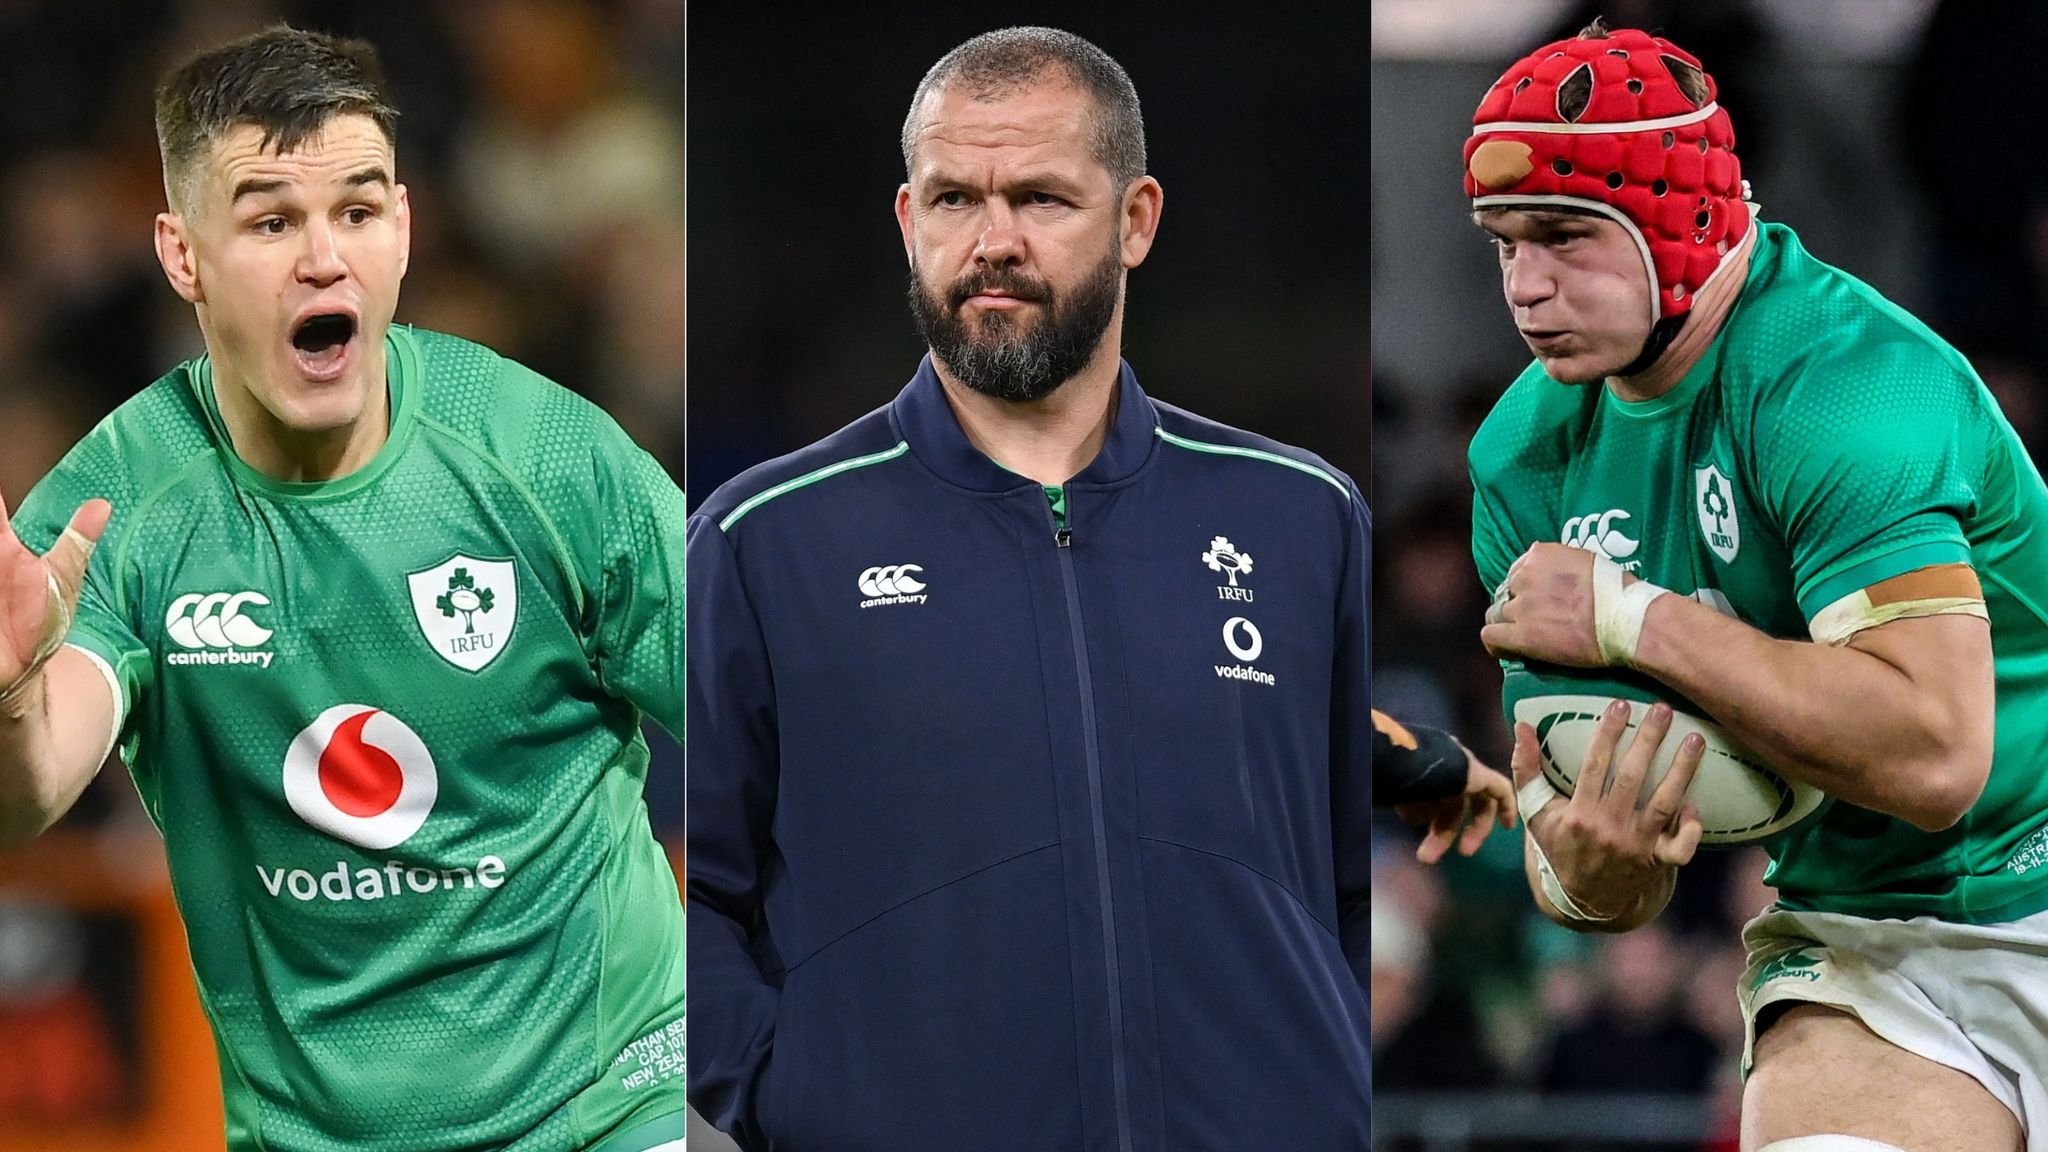 Six Nations 2023 Championship in focus Ireland seeking silverware under Andy Farrell Rugby Union News Sky Sports